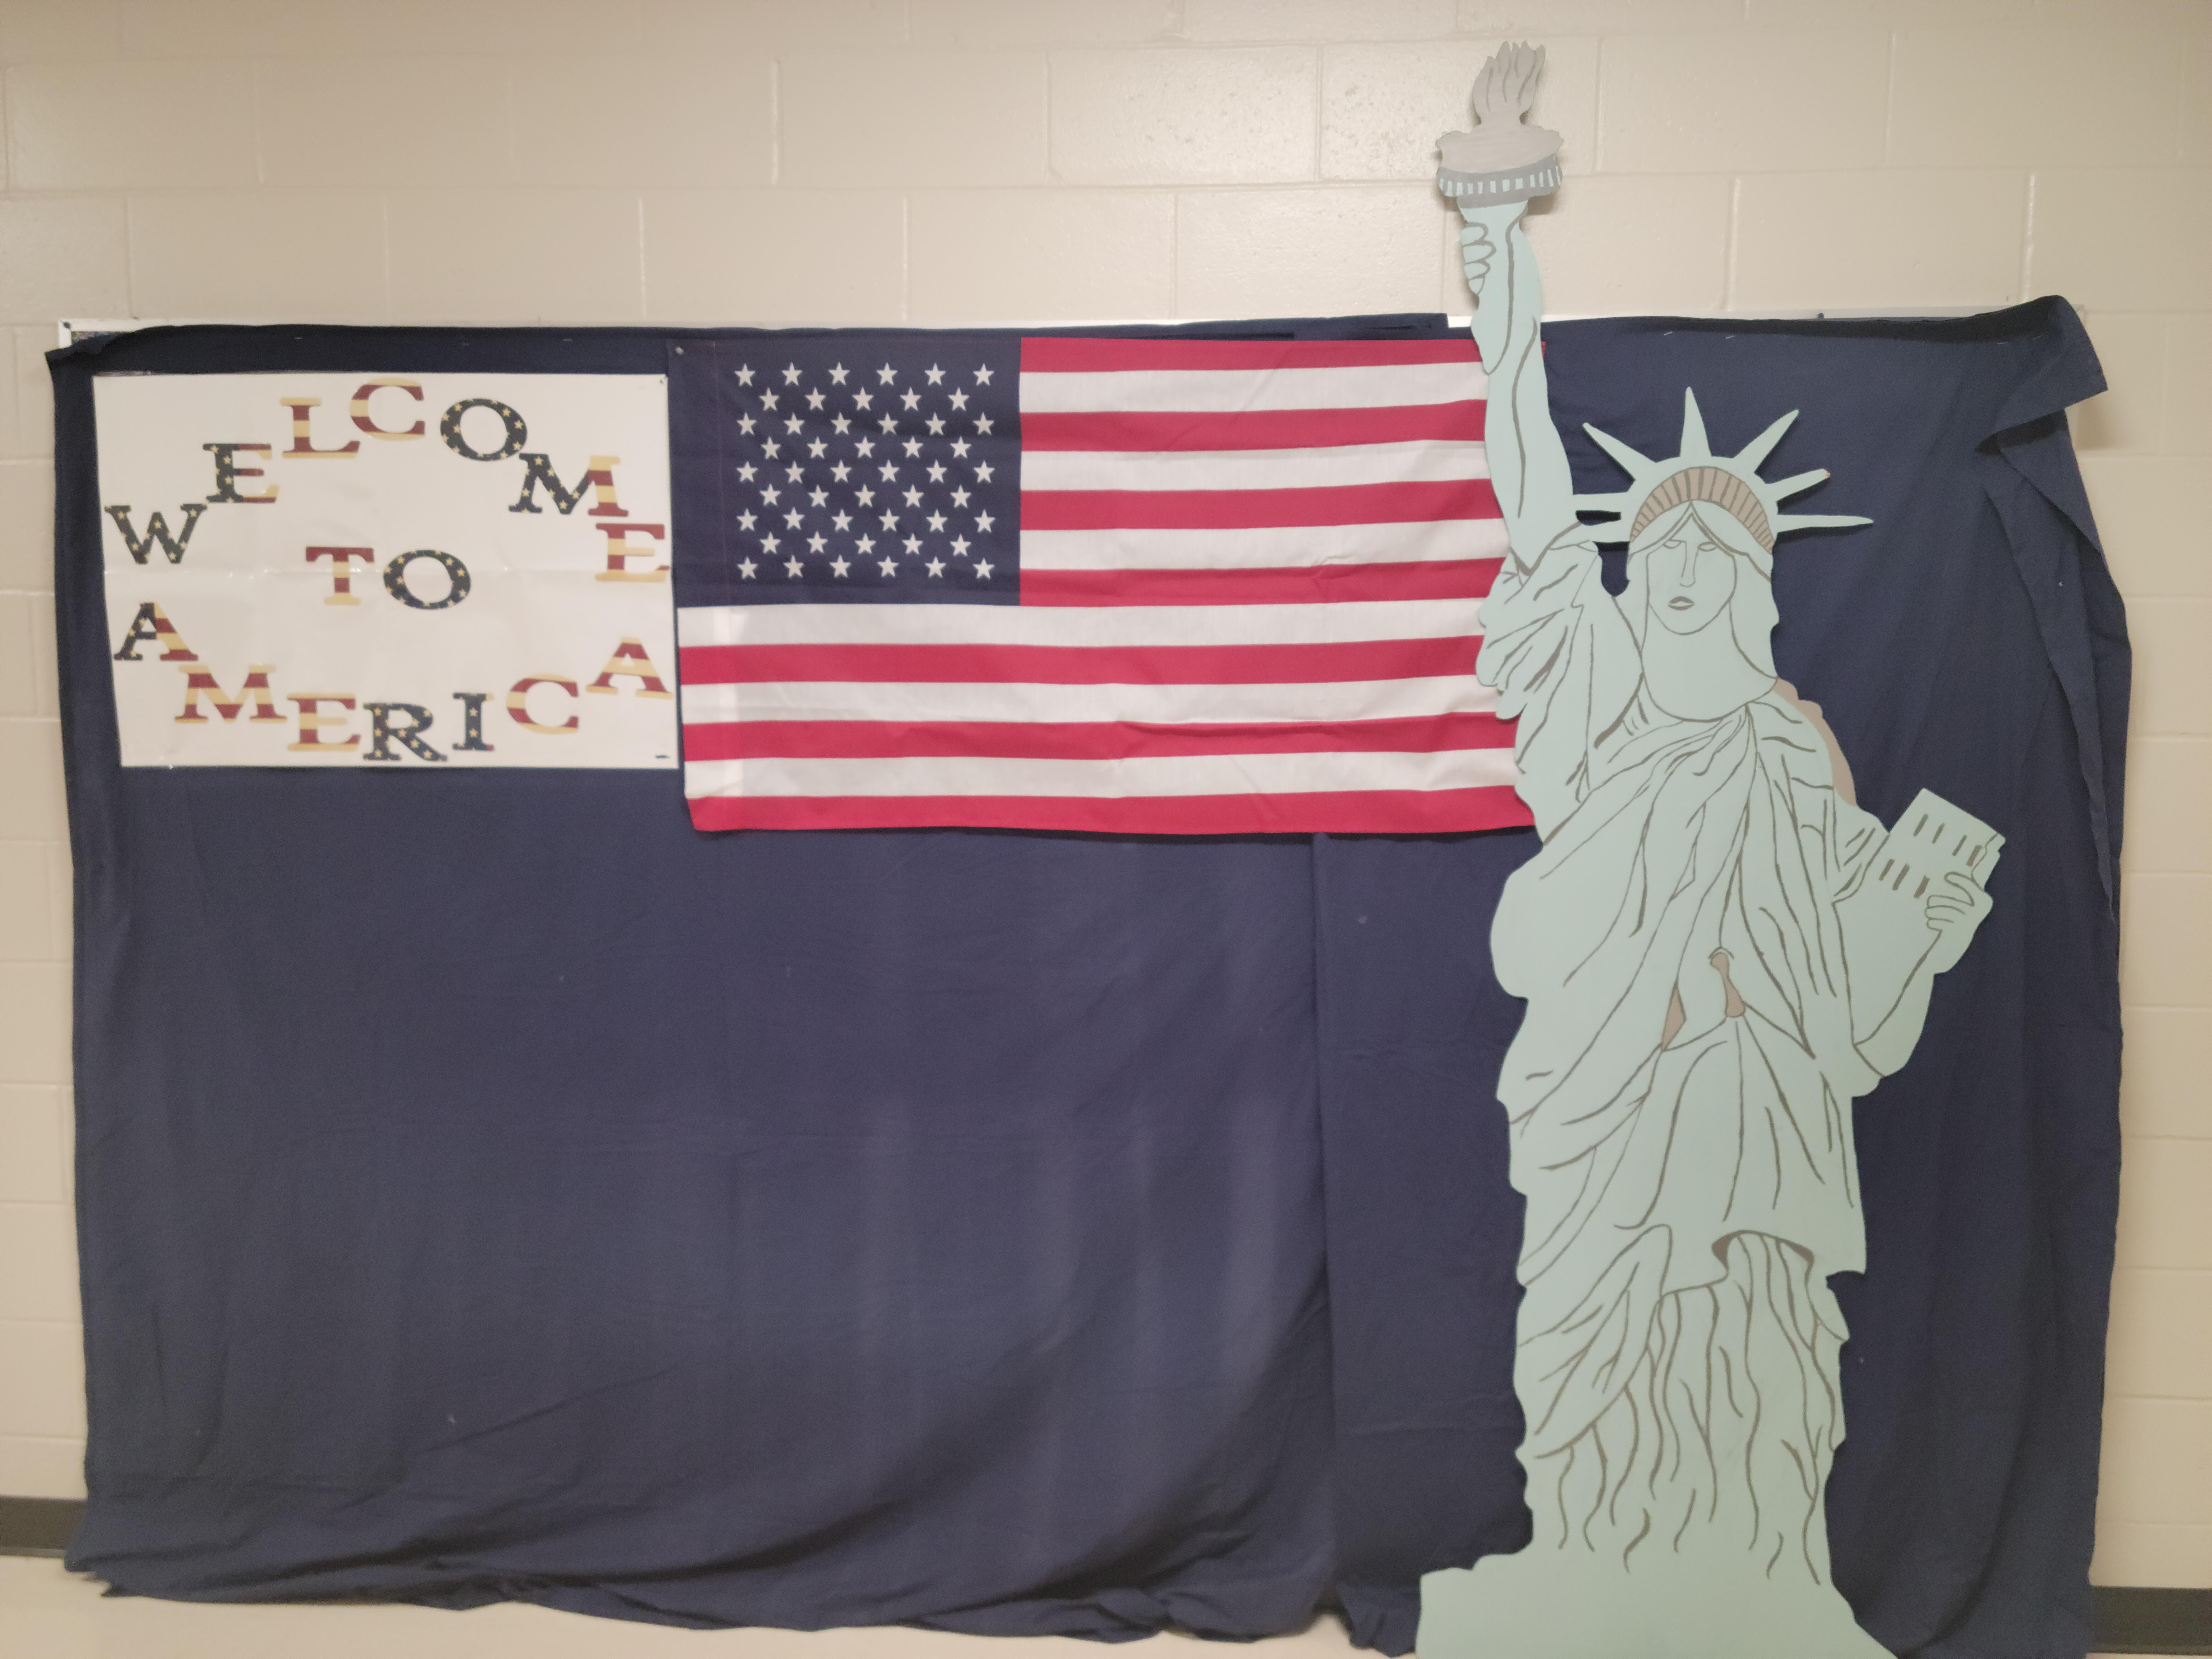 Read More Welcome to America! Third grade Immigration Simulation